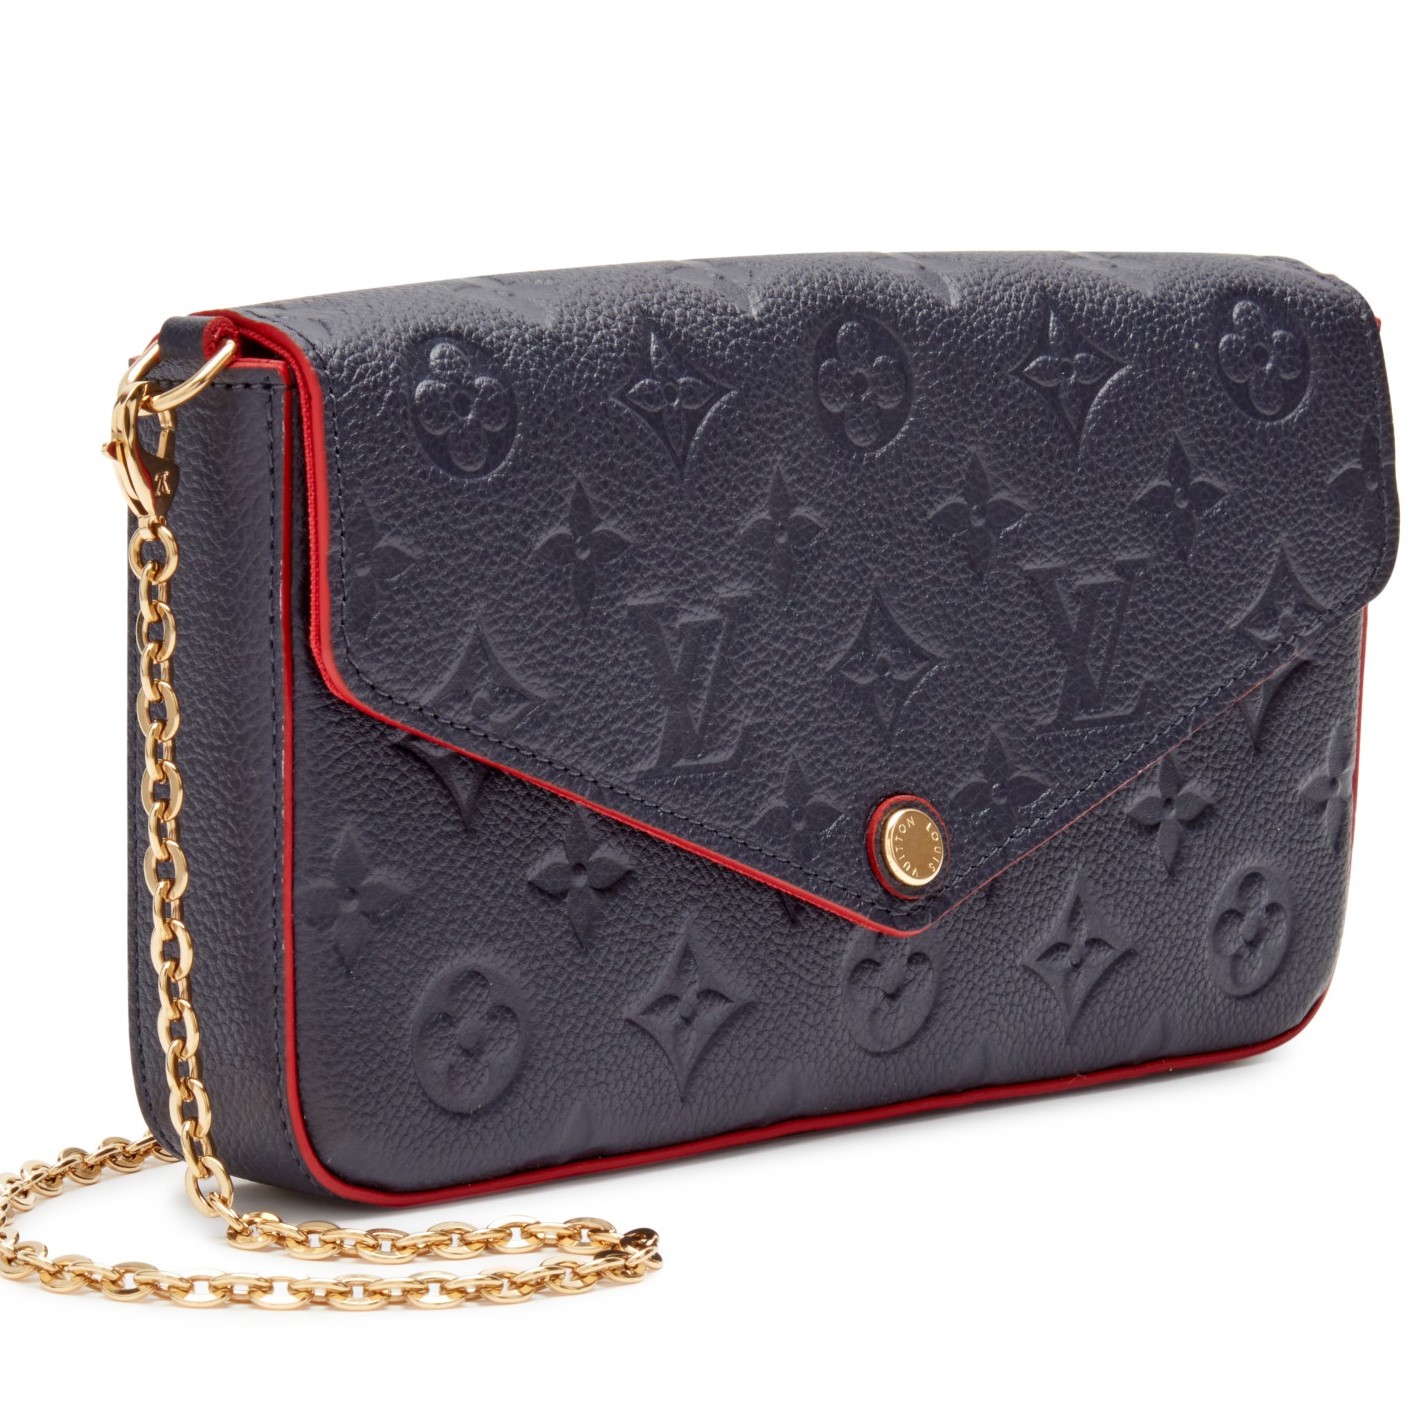 TÚI ĐEO CHÉO NỮ LV LOUIS VUITTON FÉLICIE POCHETTE MARINE ROUGE MONOGRAM EMPREINTE LEATHER WALLETS AND SMALL LEATHER GOODS M64099 6